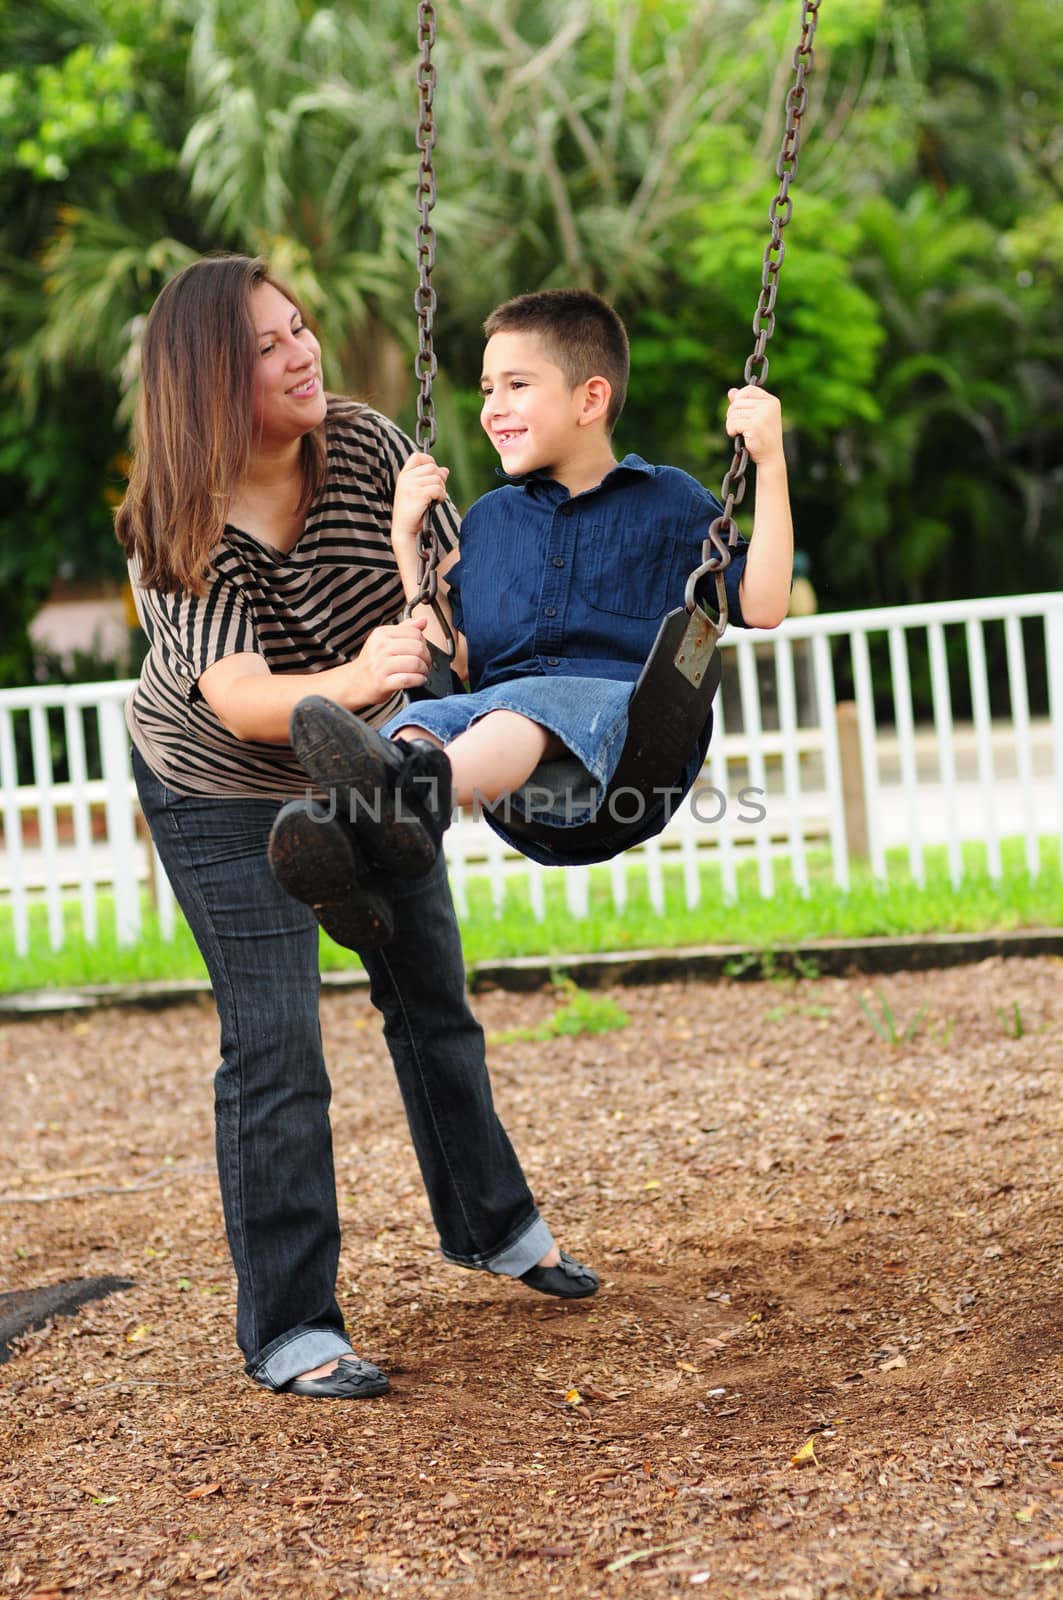 mother and son at park on swing by ftlaudgirl